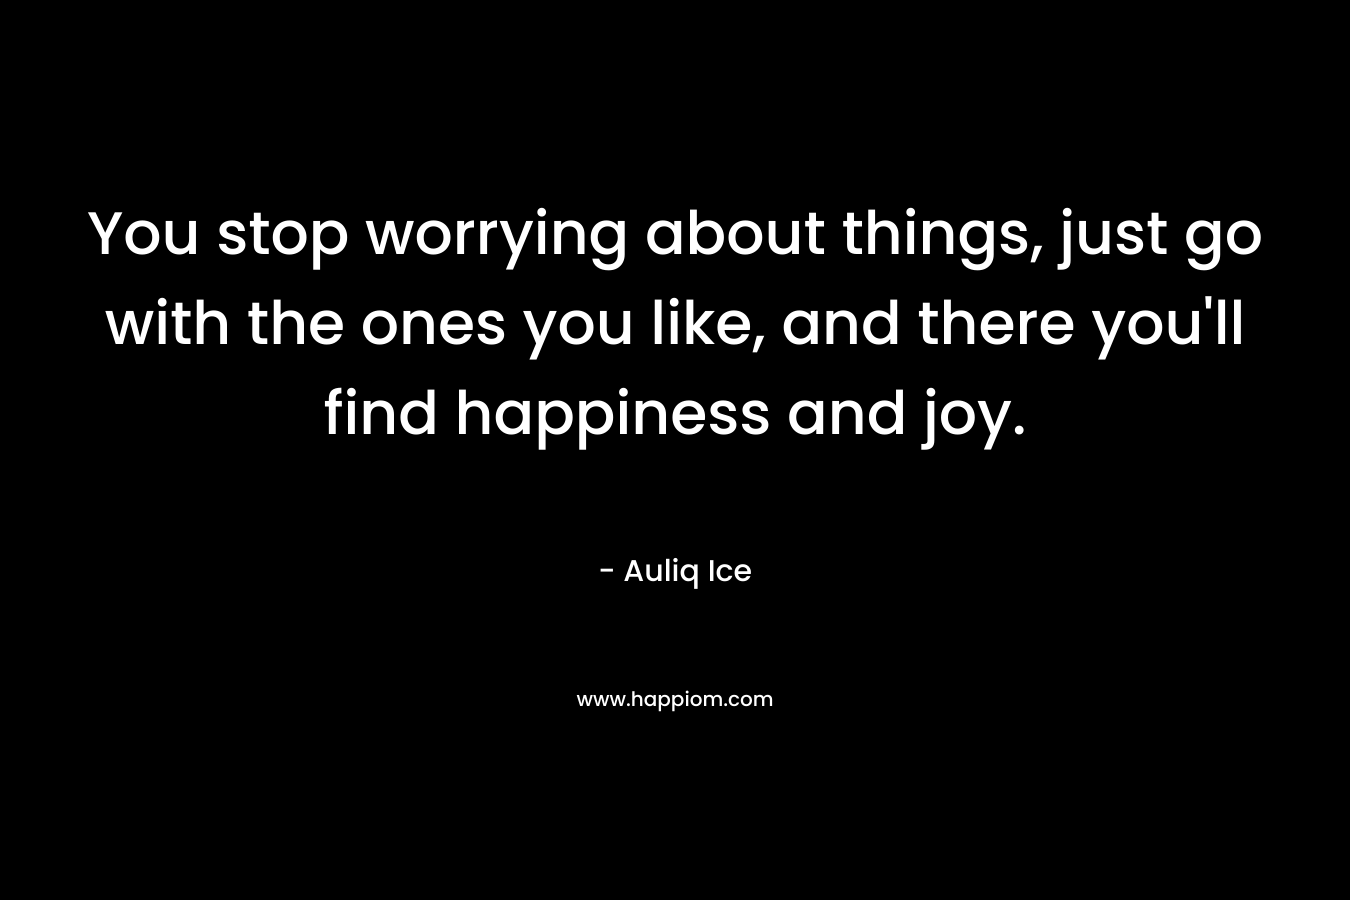 You stop worrying about things, just go with the ones you like, and there you'll find happiness and joy.